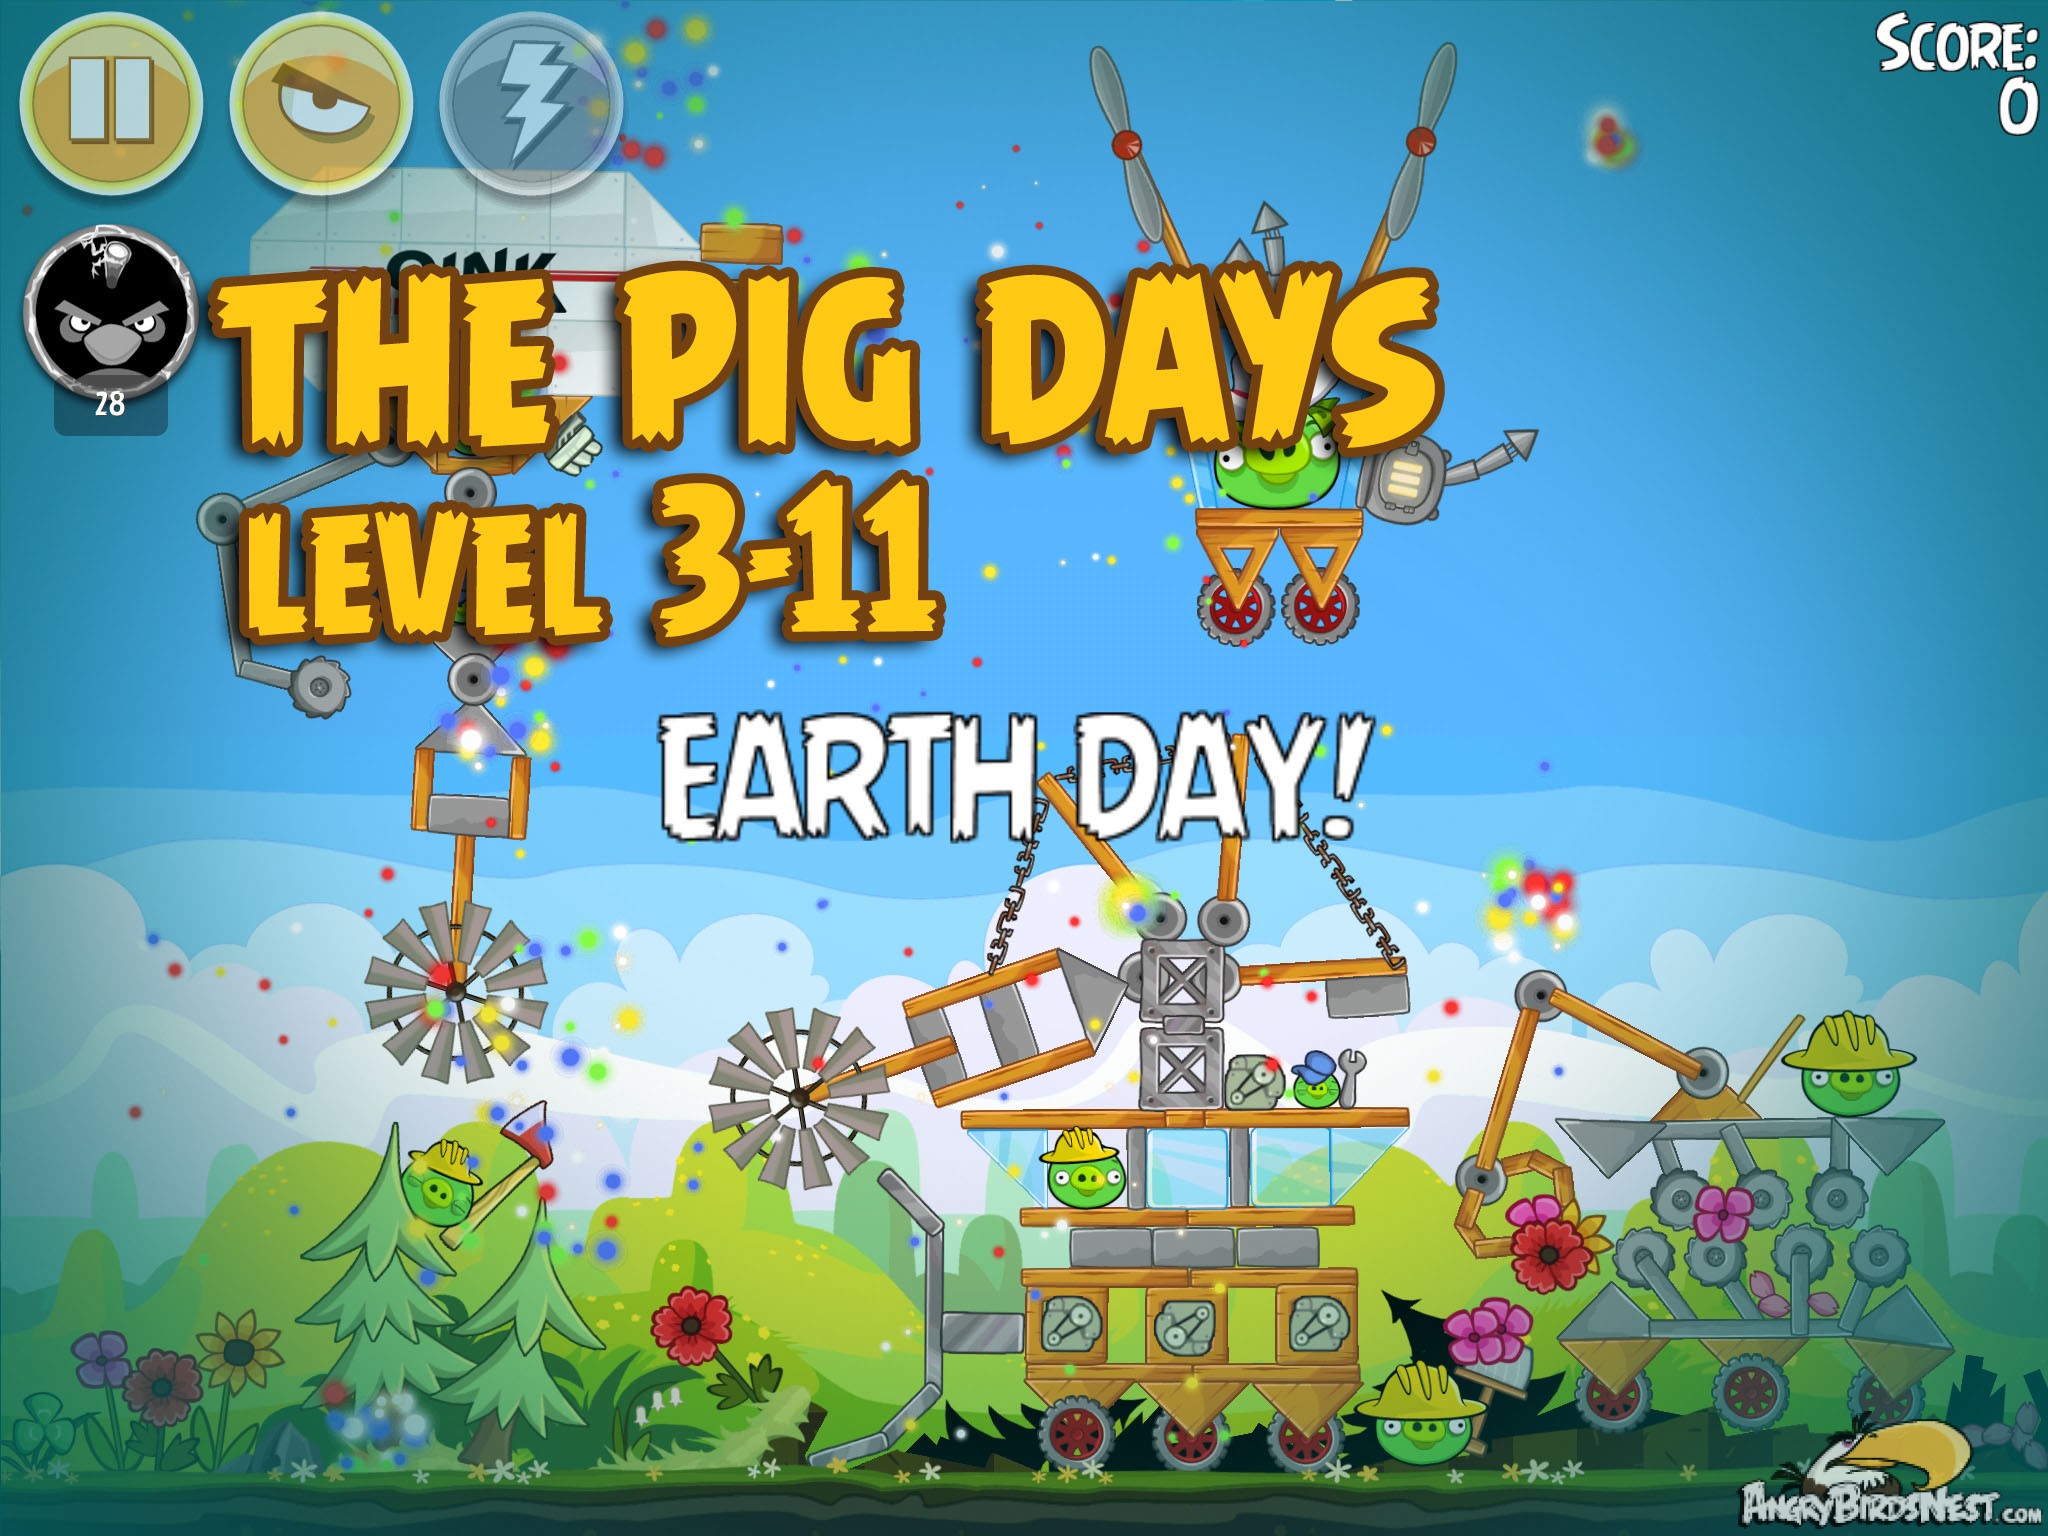 Angry Birds Seasons The Pig Days Level 3-11